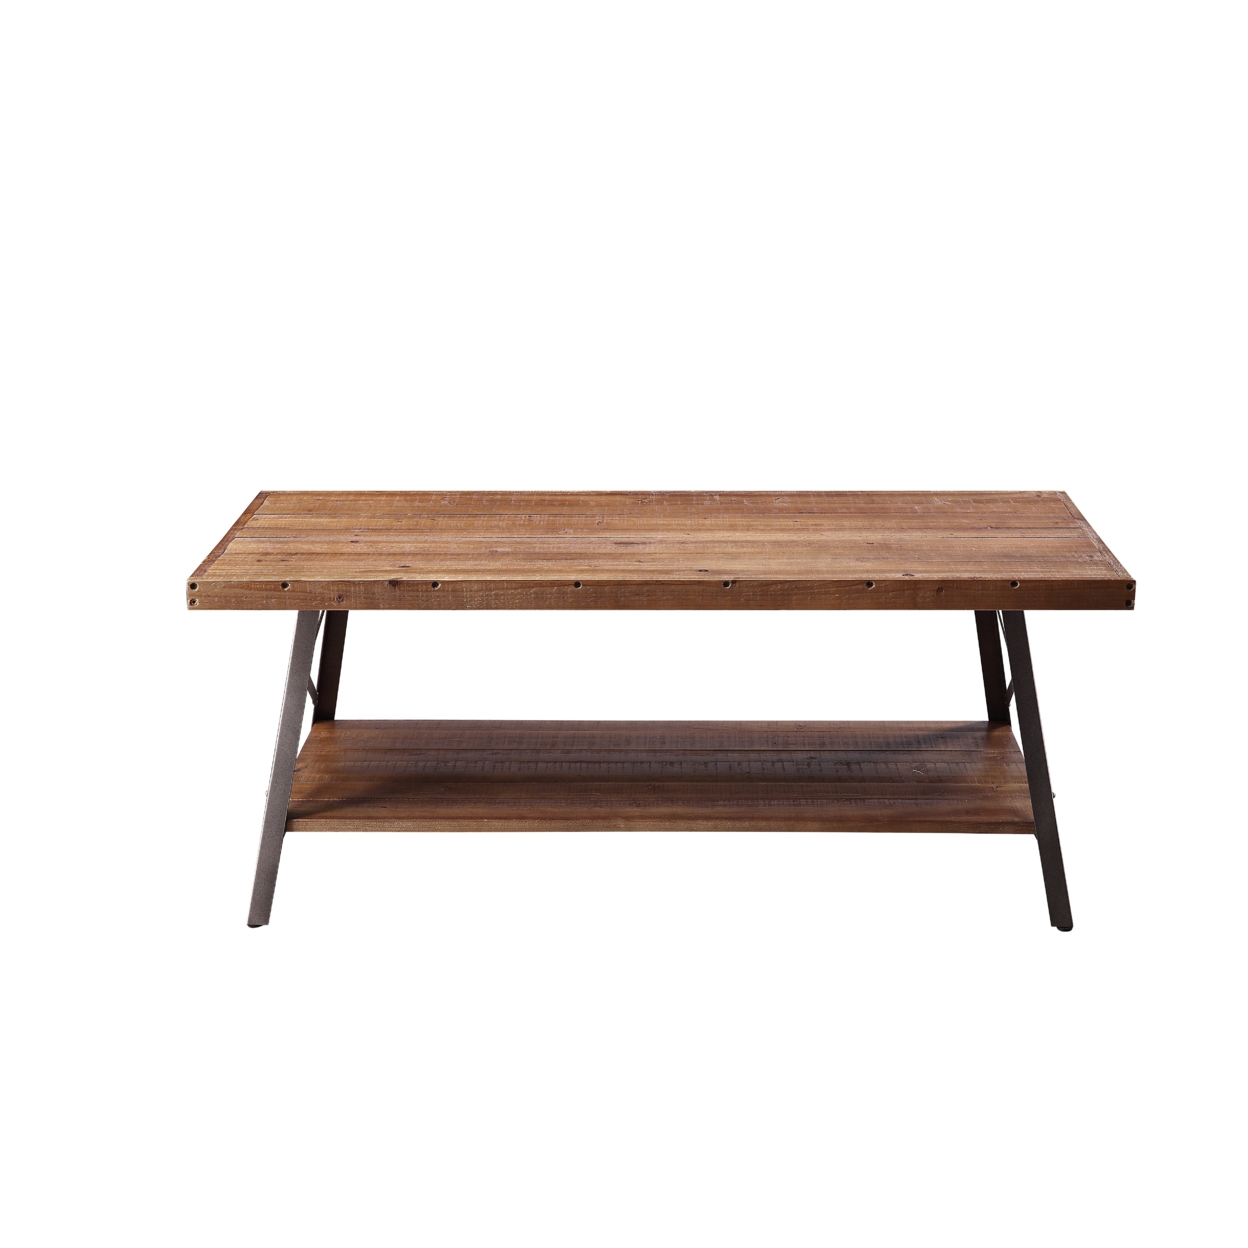 Wooden Coffee Table With X Crossed Metal Sides And Open Shelf, Brown And Black- Saltoro Sherpi